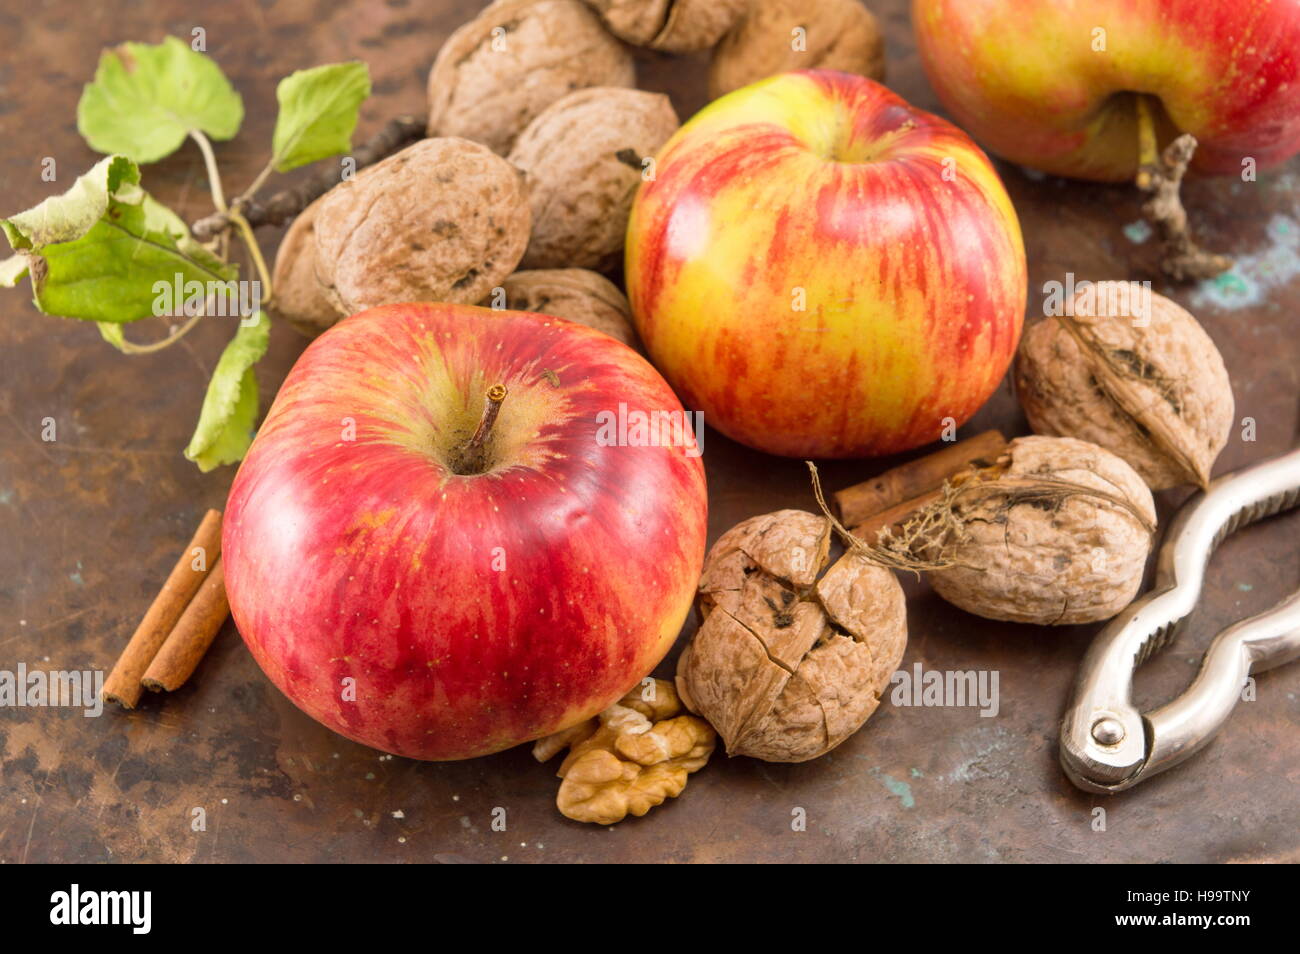 Apples, walnuts and nuts cracker on a table Stock Photo